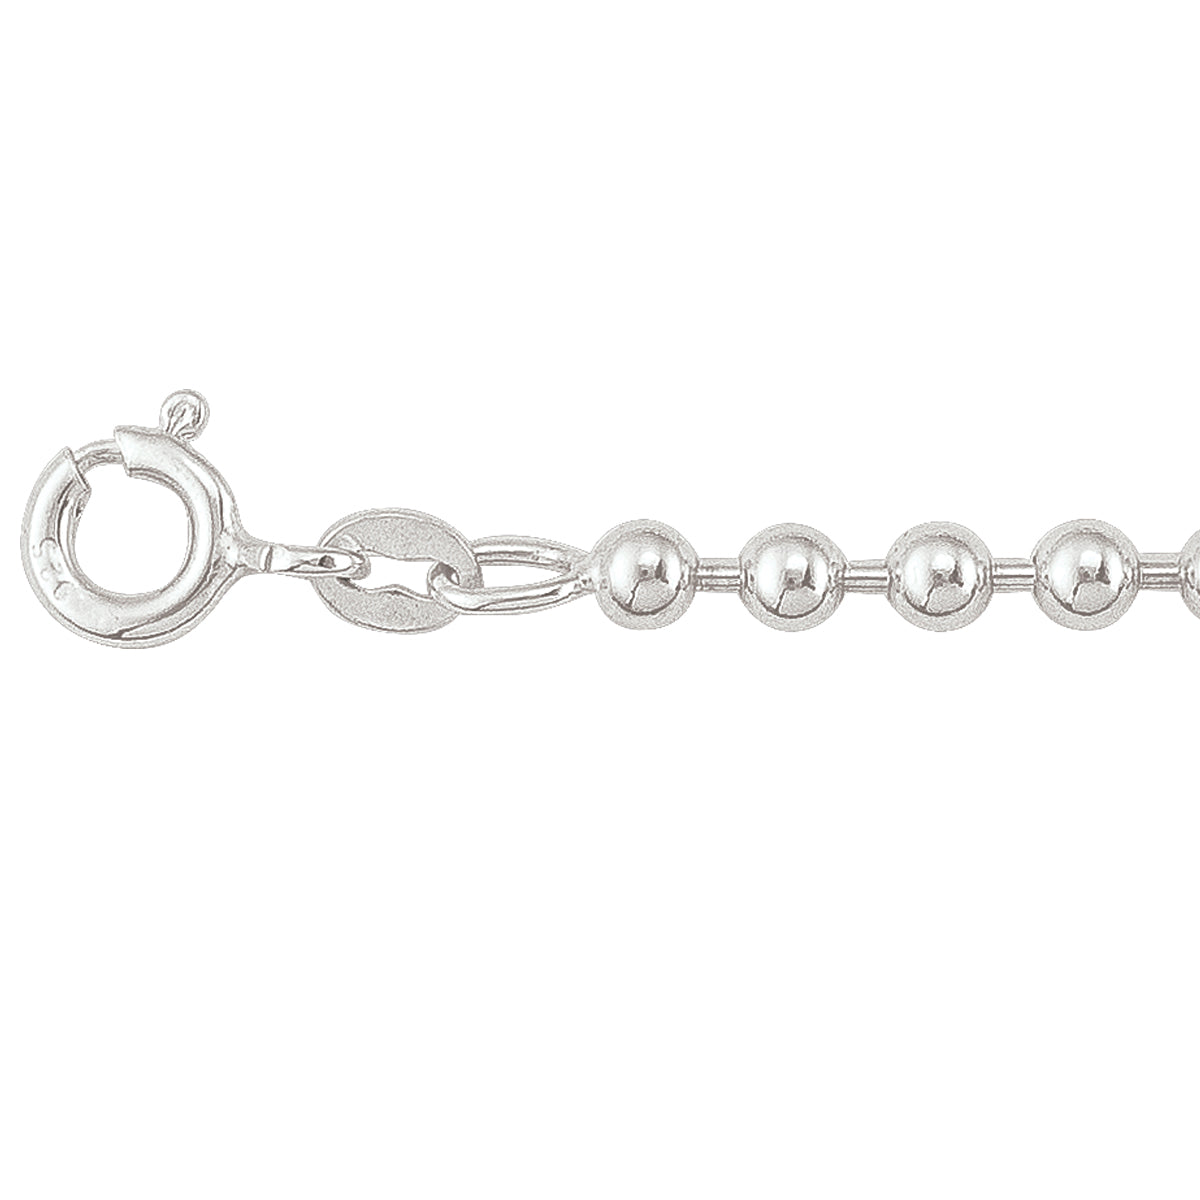 CHAINS SILVER BEAD LINK 